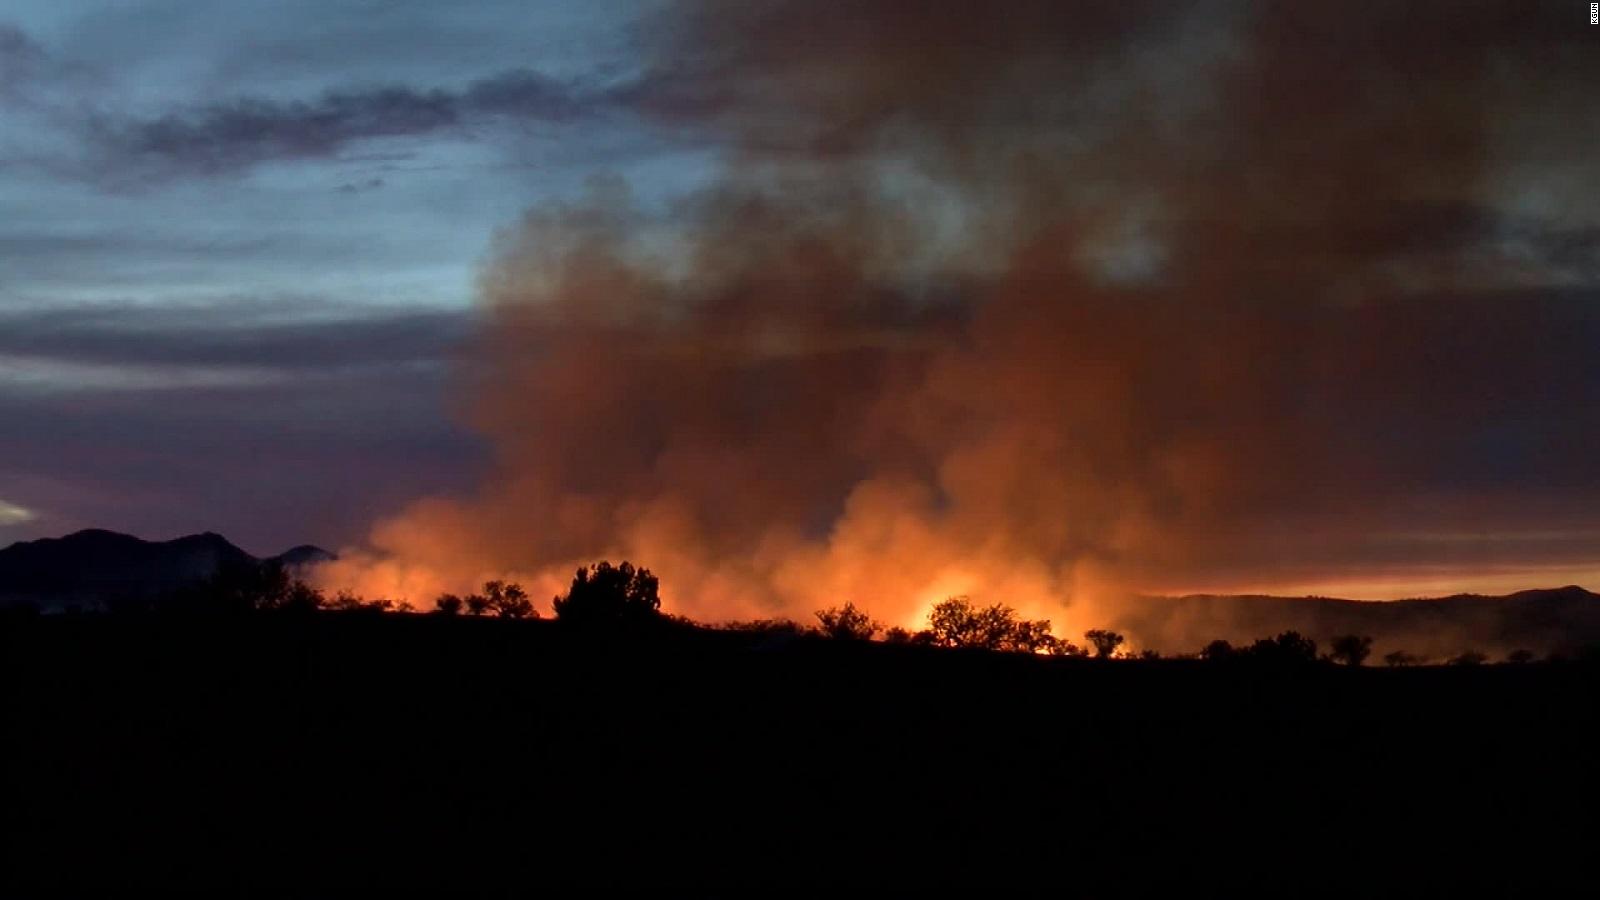 Border Patrol Agents Gender Reveal Party Ignited A 47000 Acre Wildfire Cnn